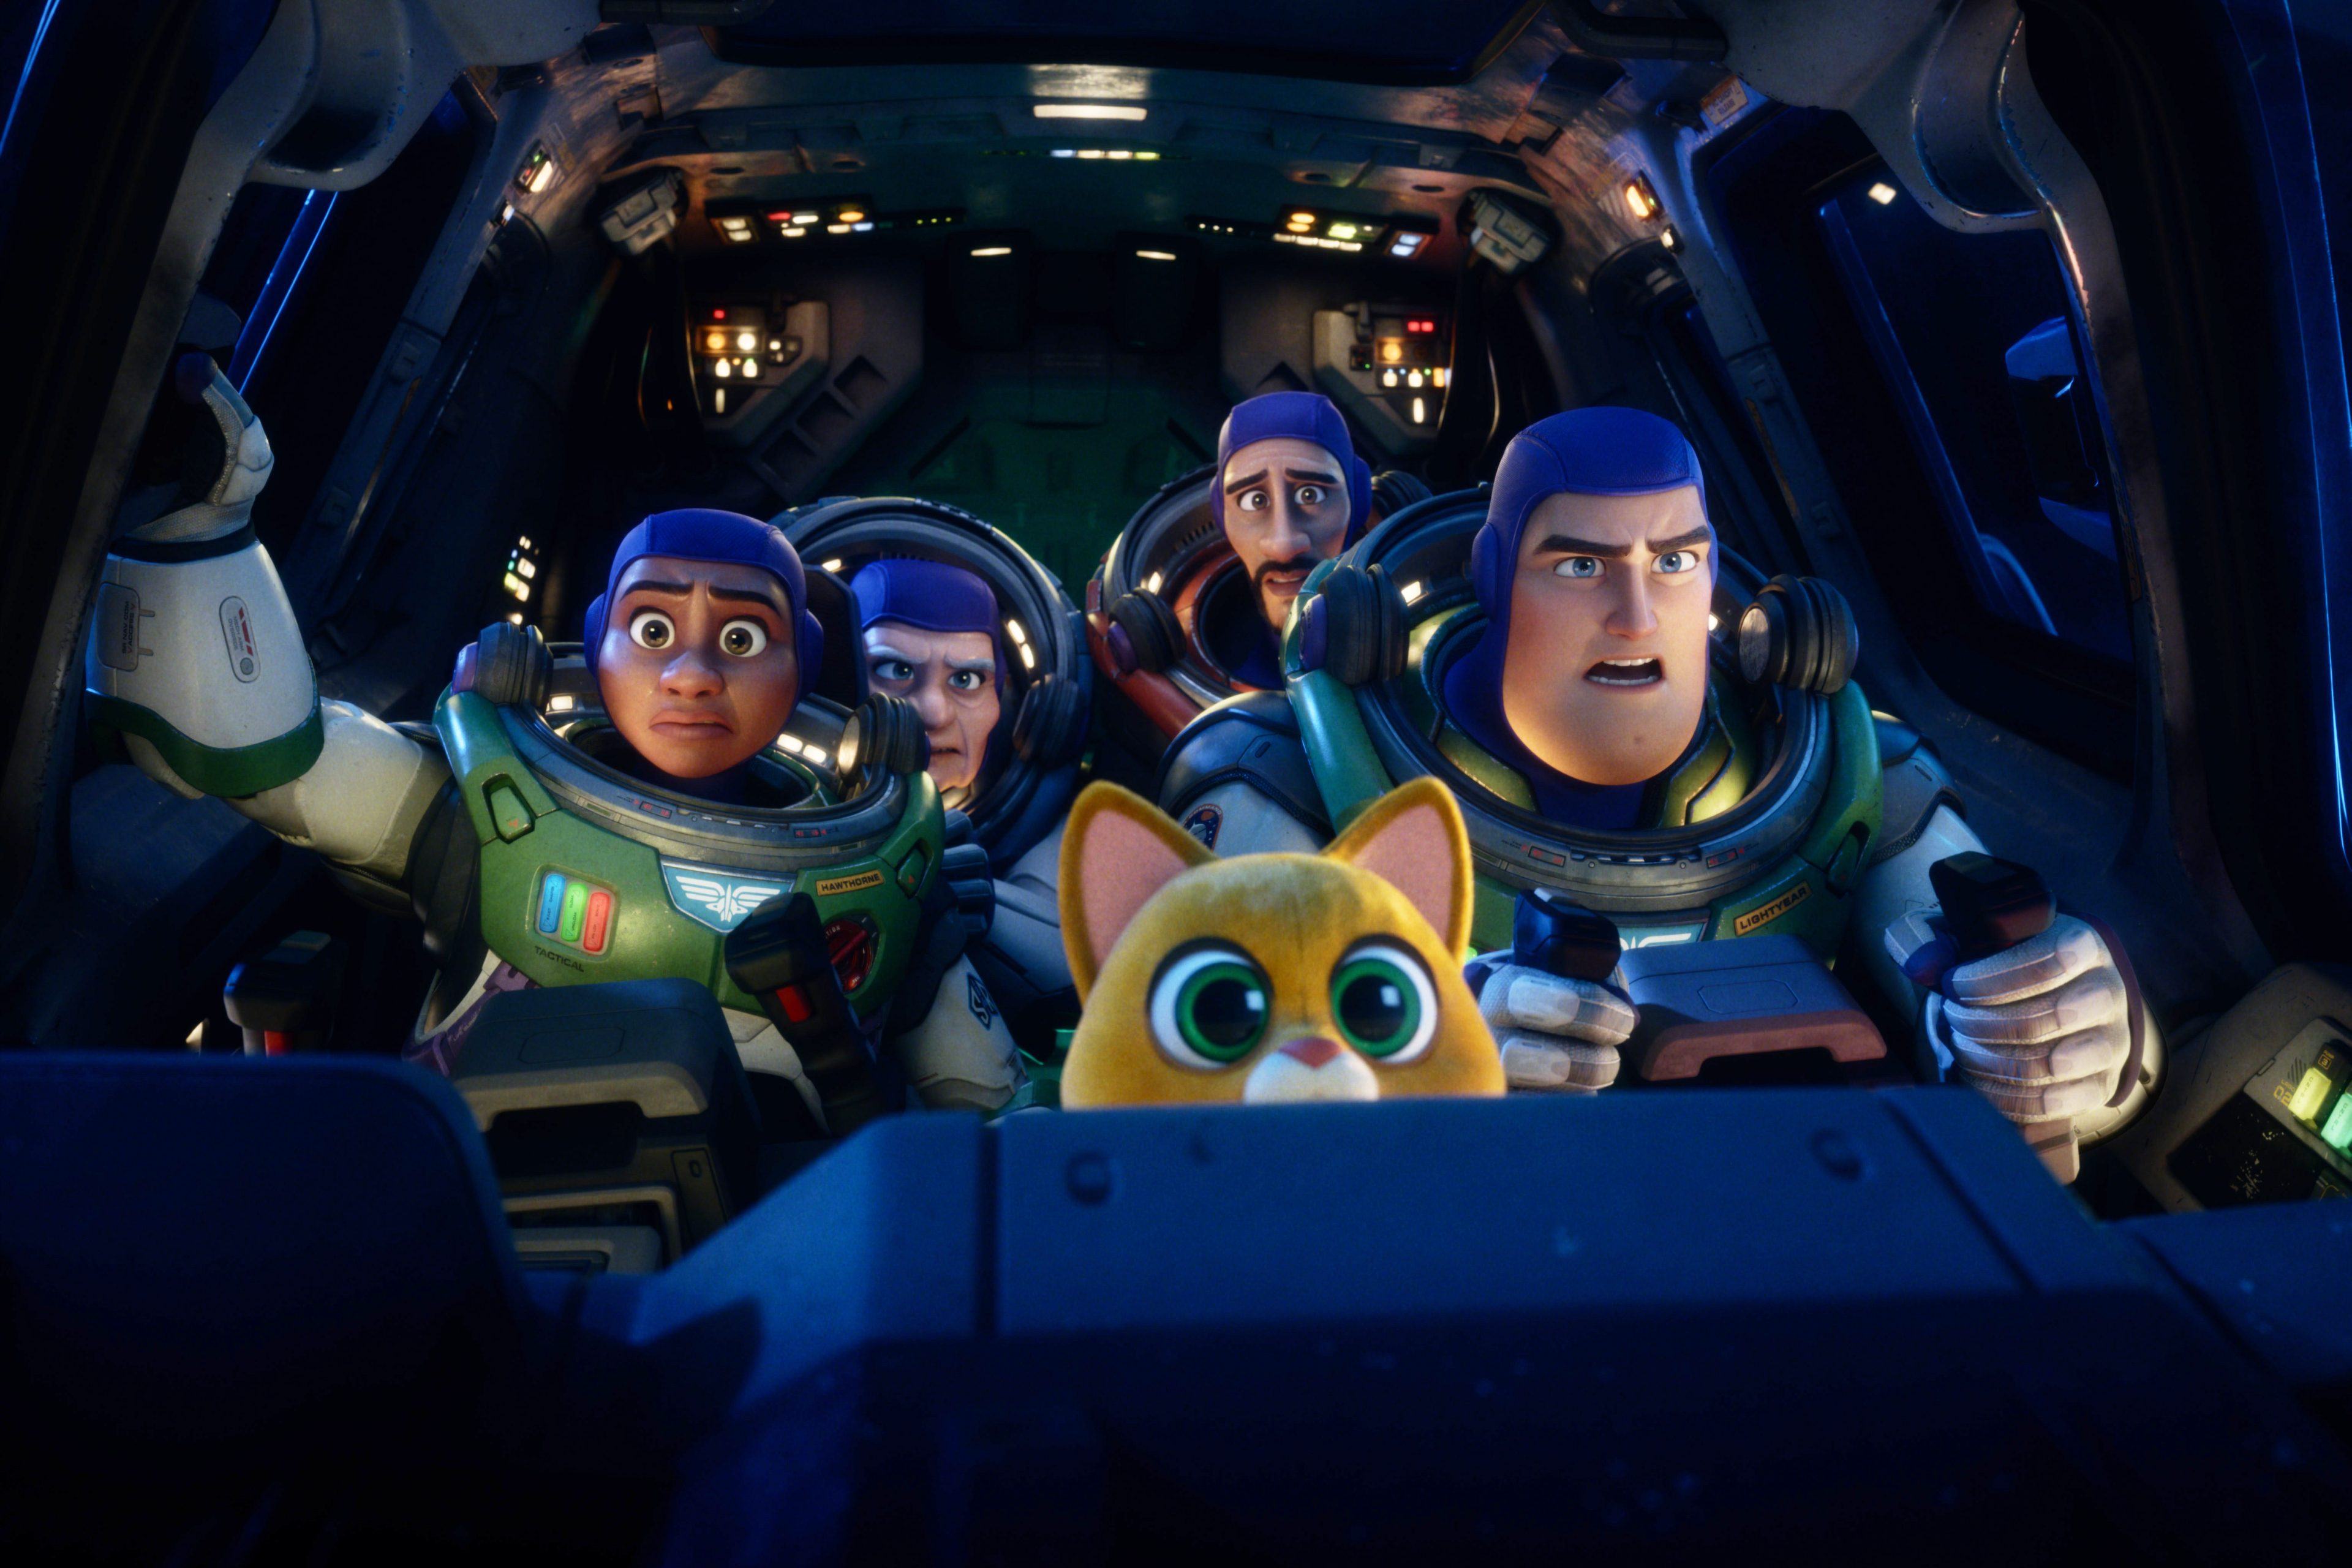 ‘Lightyear’ Lifts Off to Number 3 on The Nielsen Streaming Charts